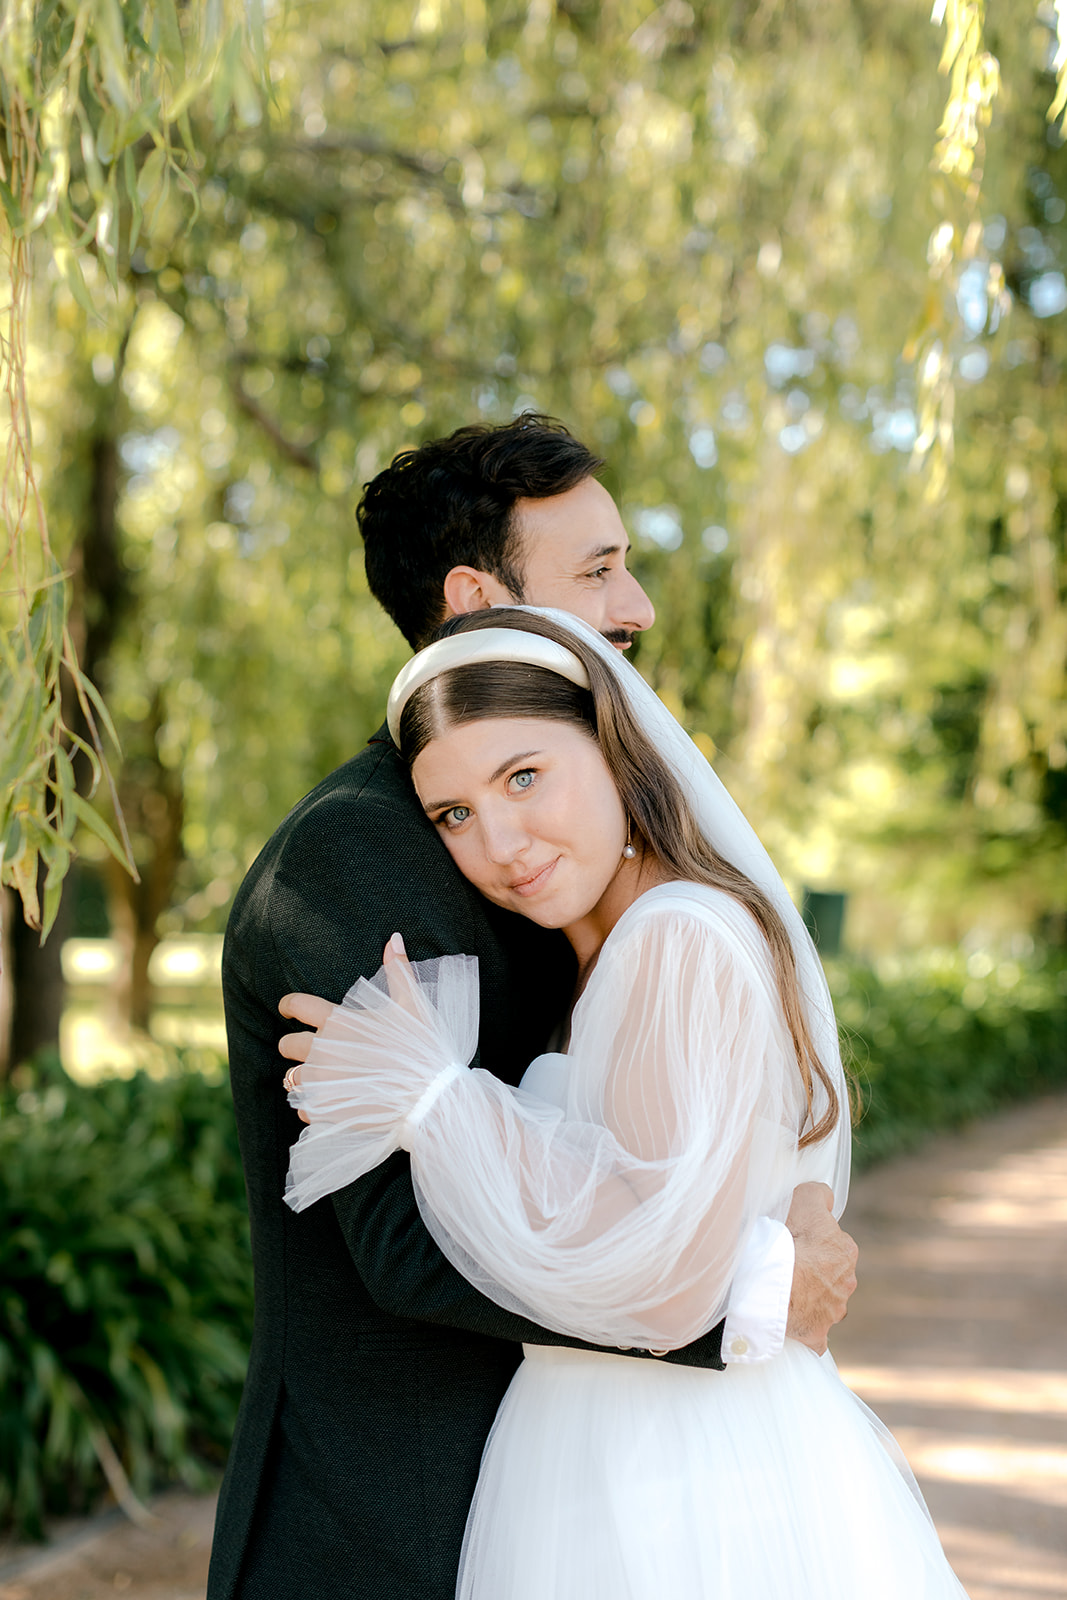 Intimate portrait of bride & groom hugging in an English-inspired garden during their elegant country wedding.